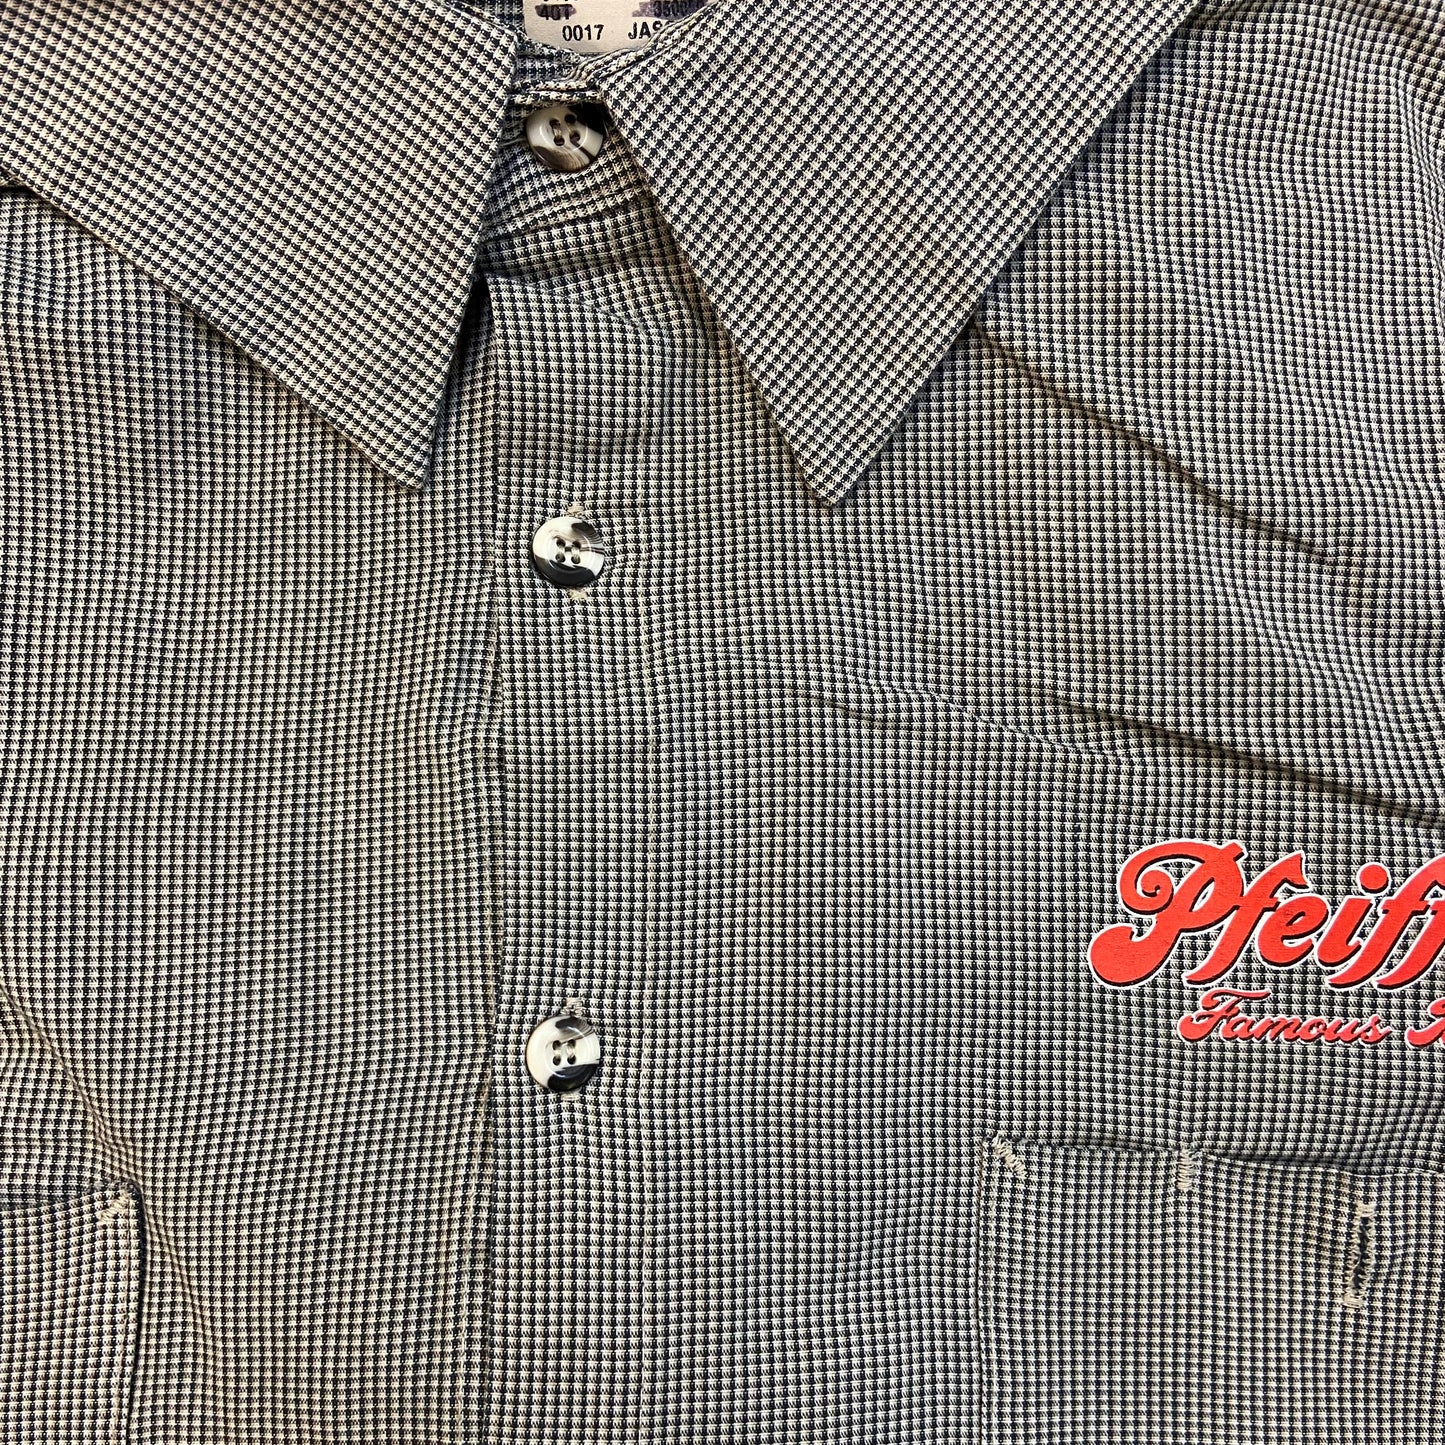 Pfeiffer’s Famous Beer Company Work Shirt